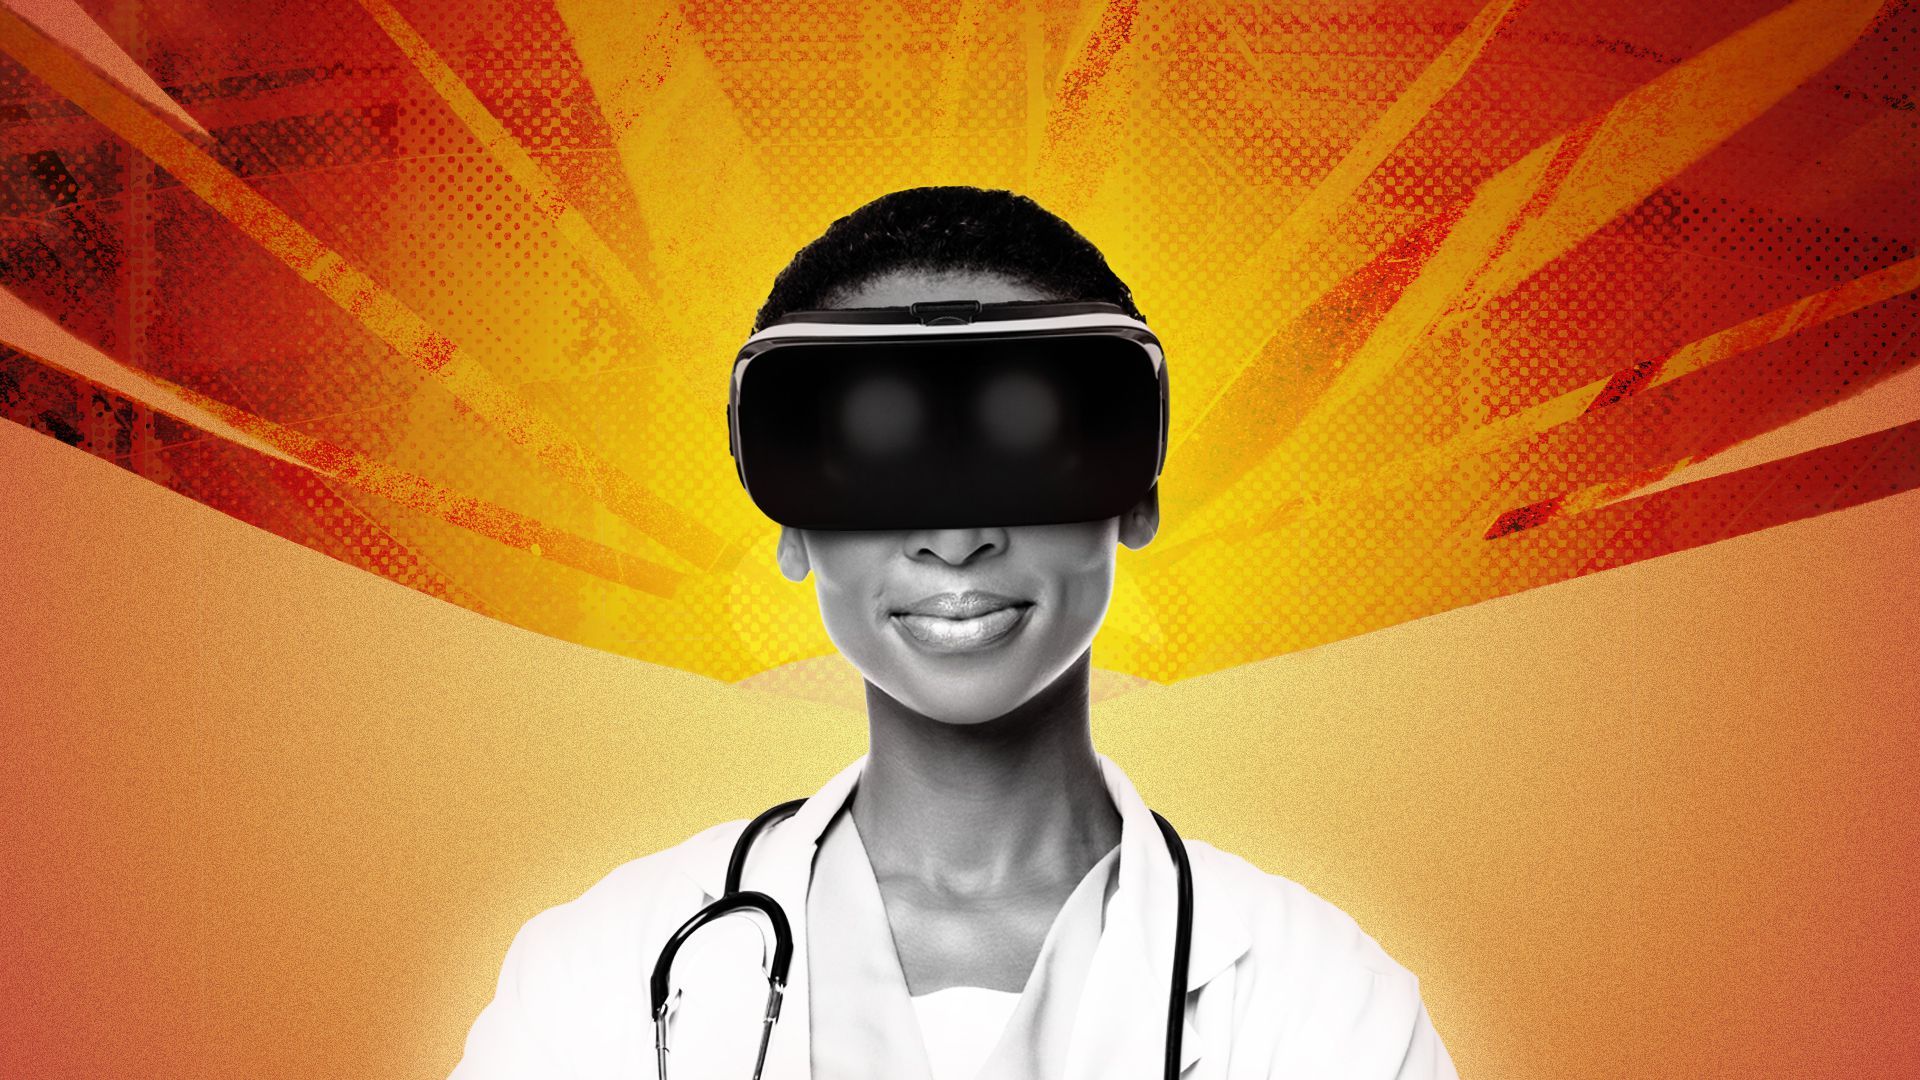 Illustration of a doctor wearing a virtual reality headset.